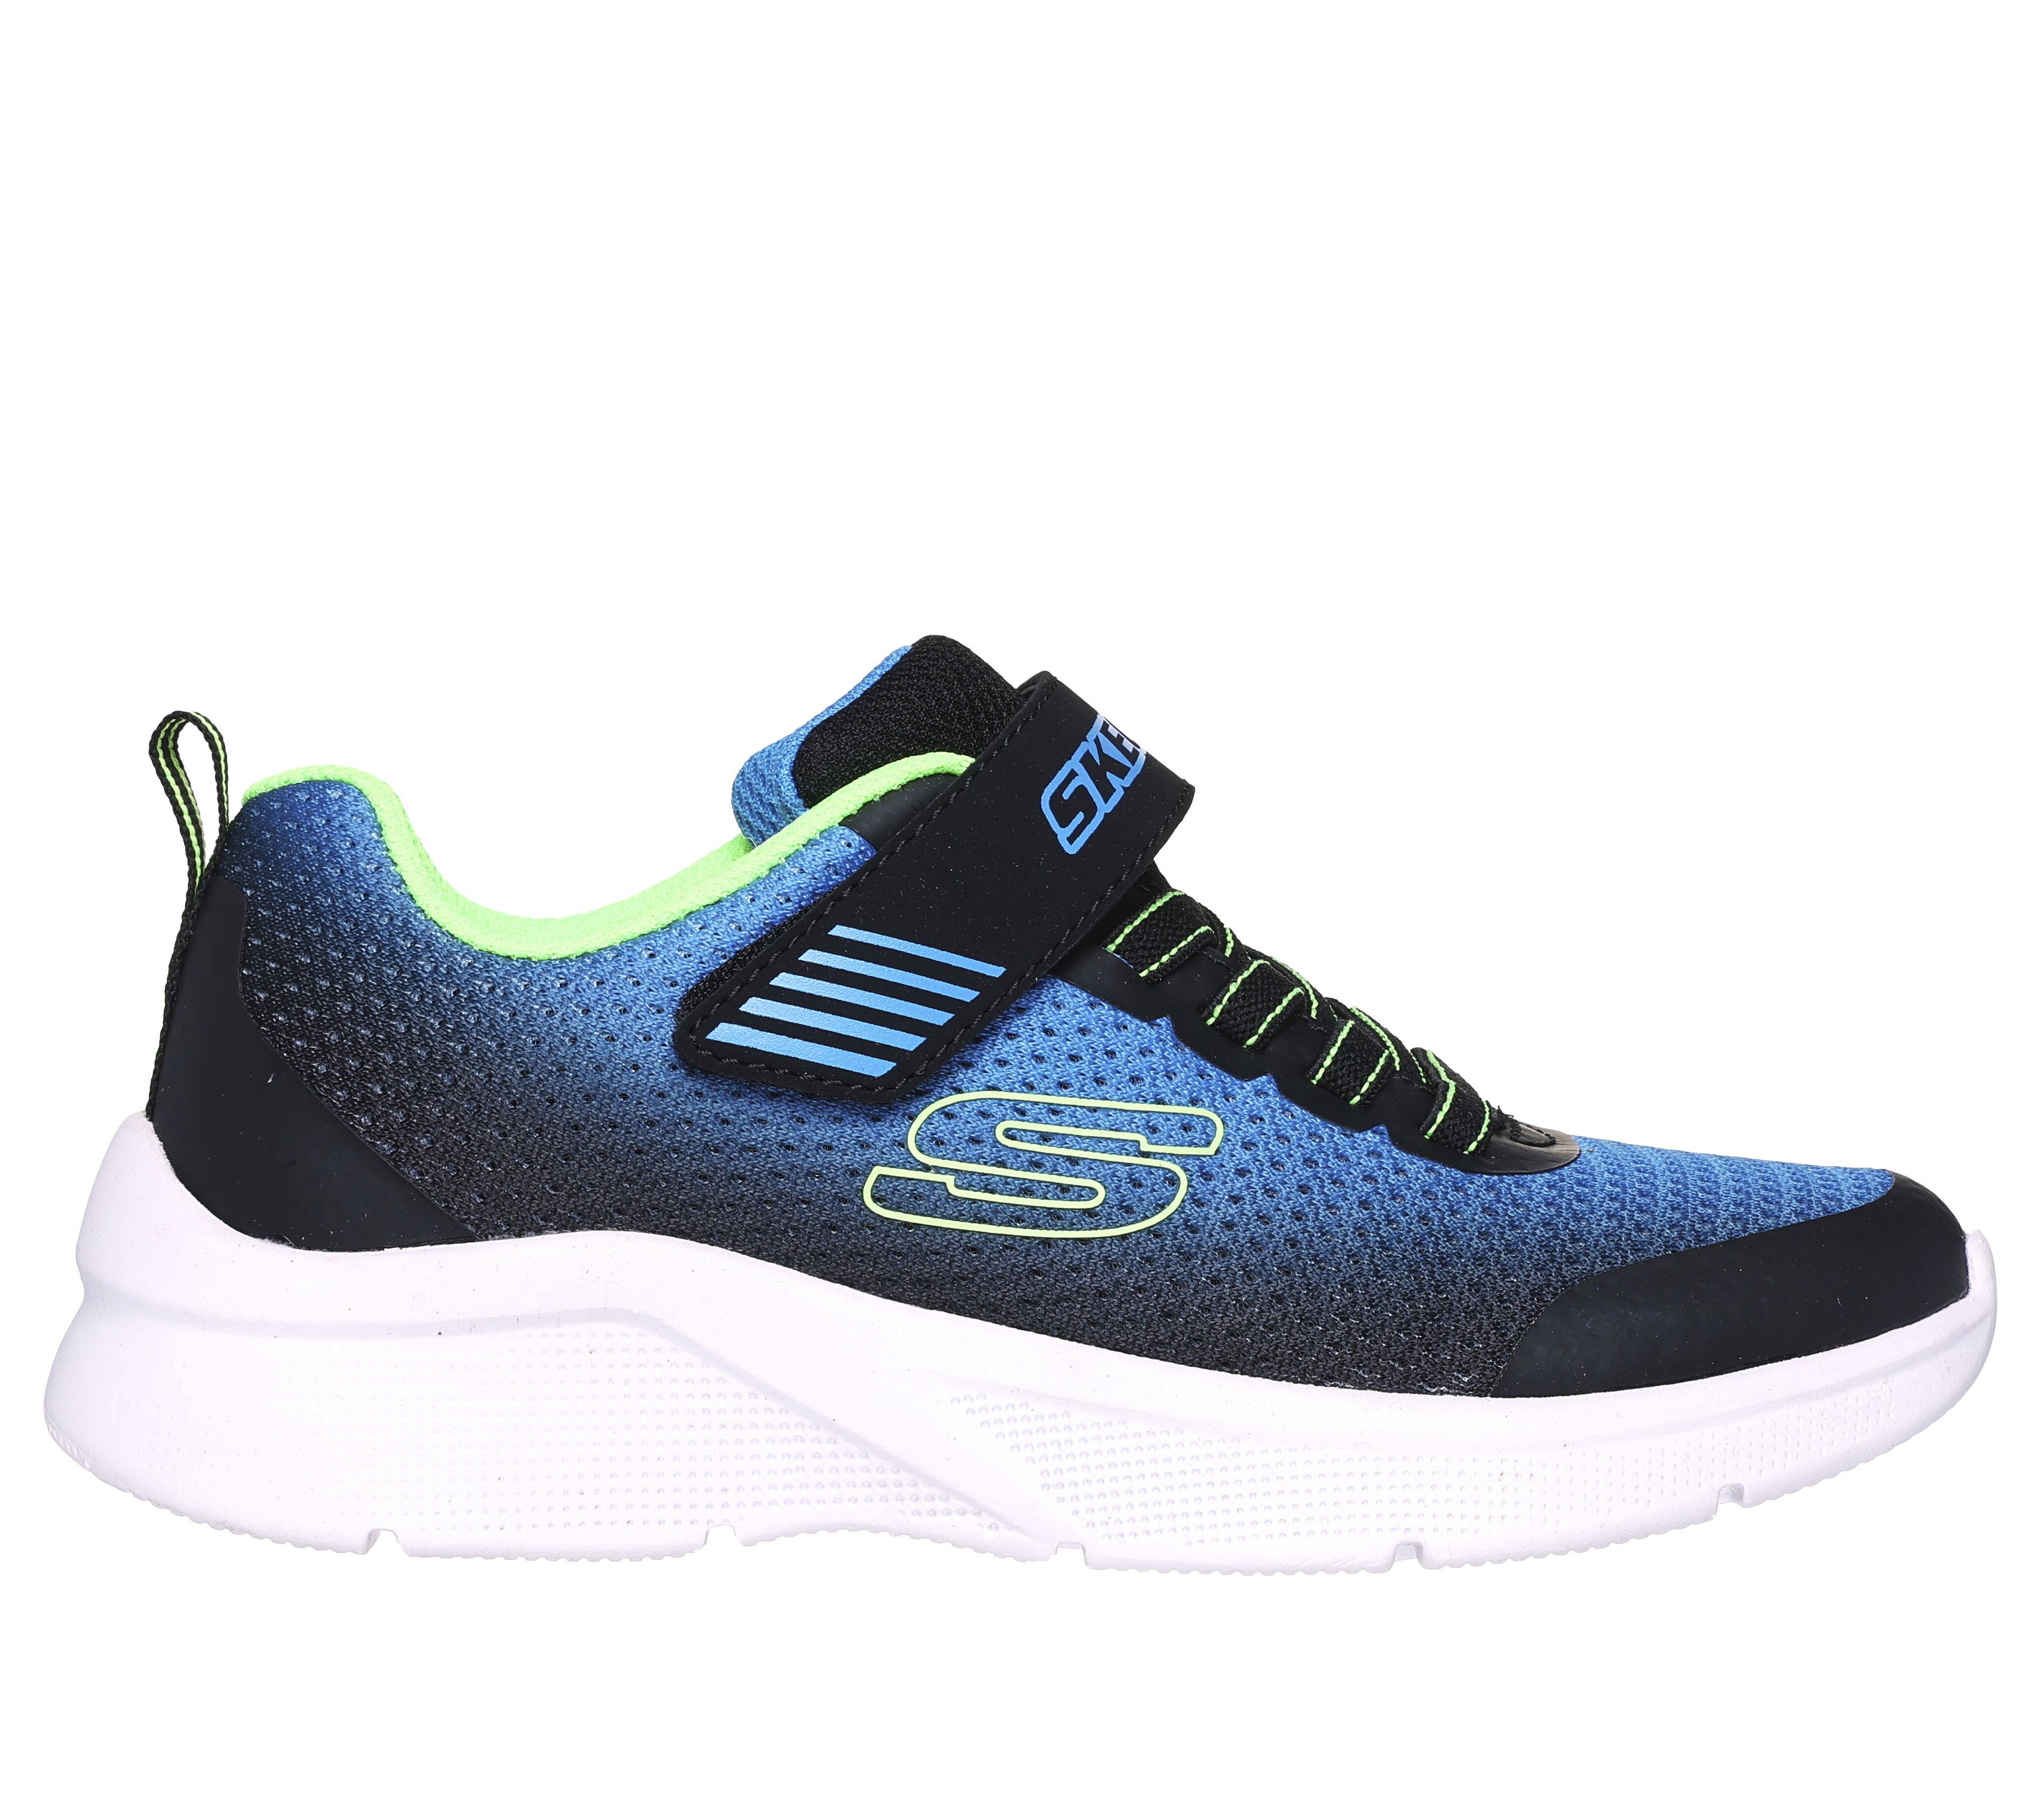 Shop Boys' Athletic Shoes | Boys Running & Gym Shoes | SKECHERS